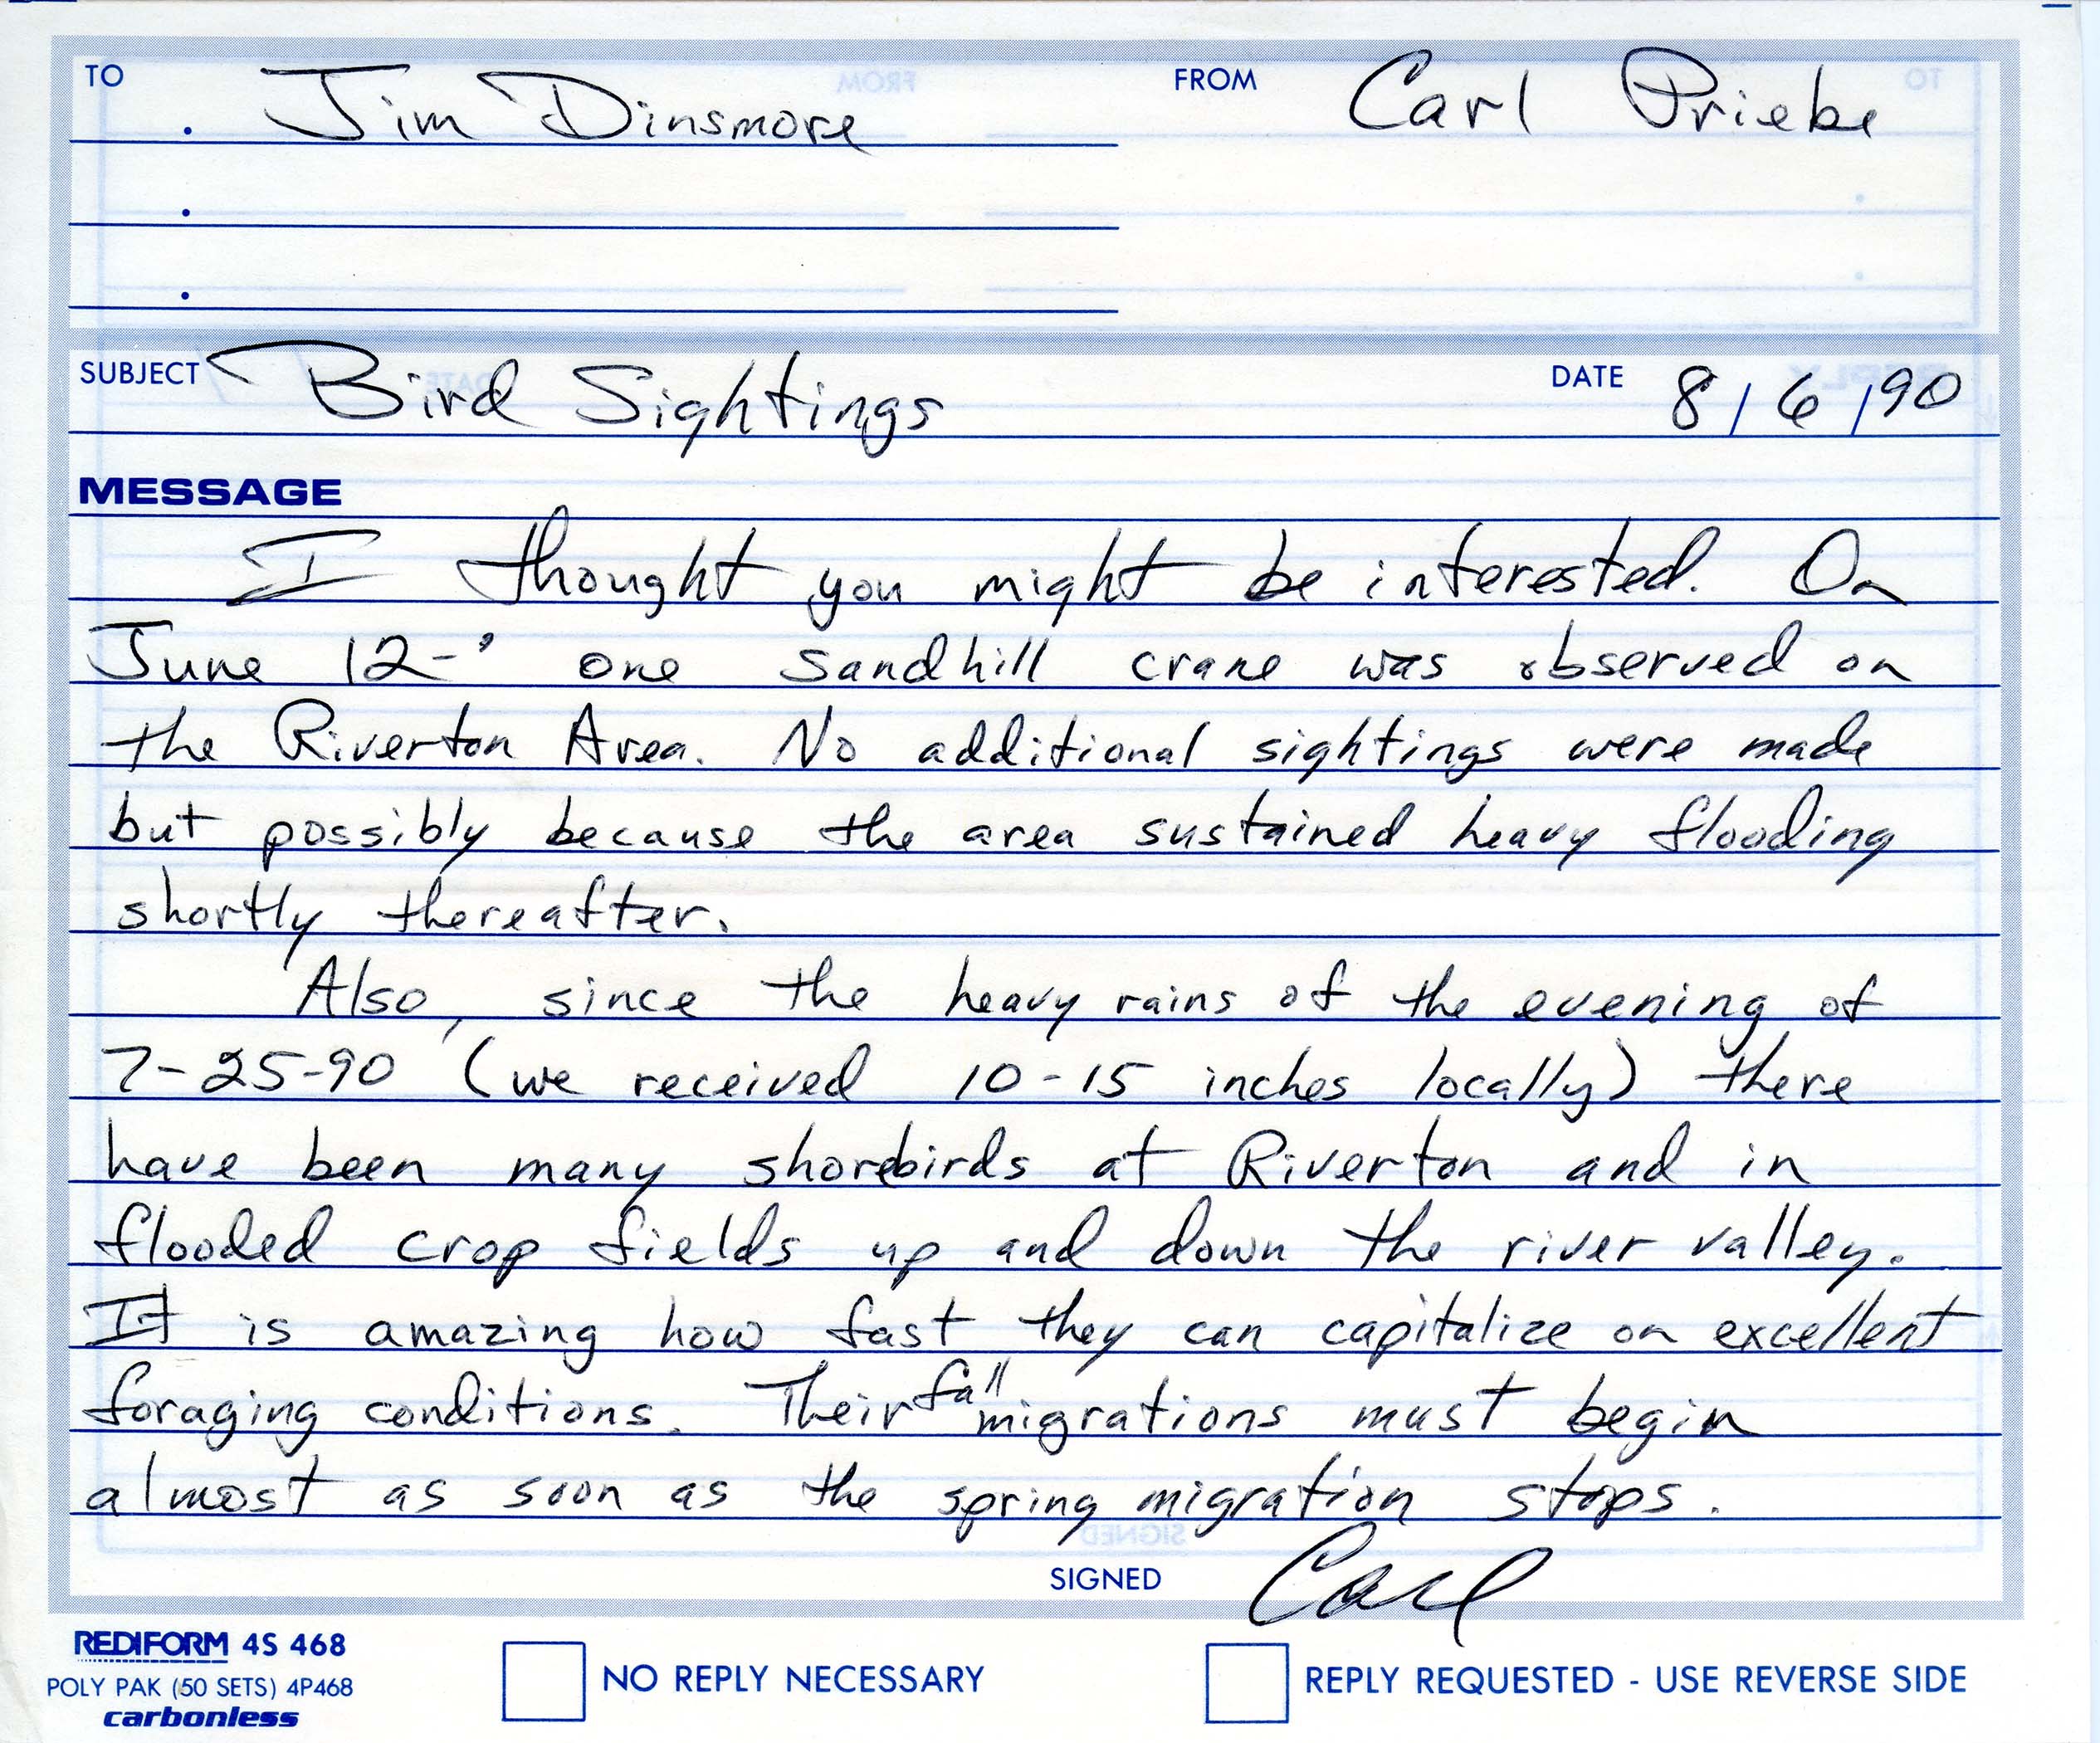 Carl Priebe letter to Jim Dinsmore regarding bird sighting for the IOU quarterly field report summer 1990, August 6, 1990